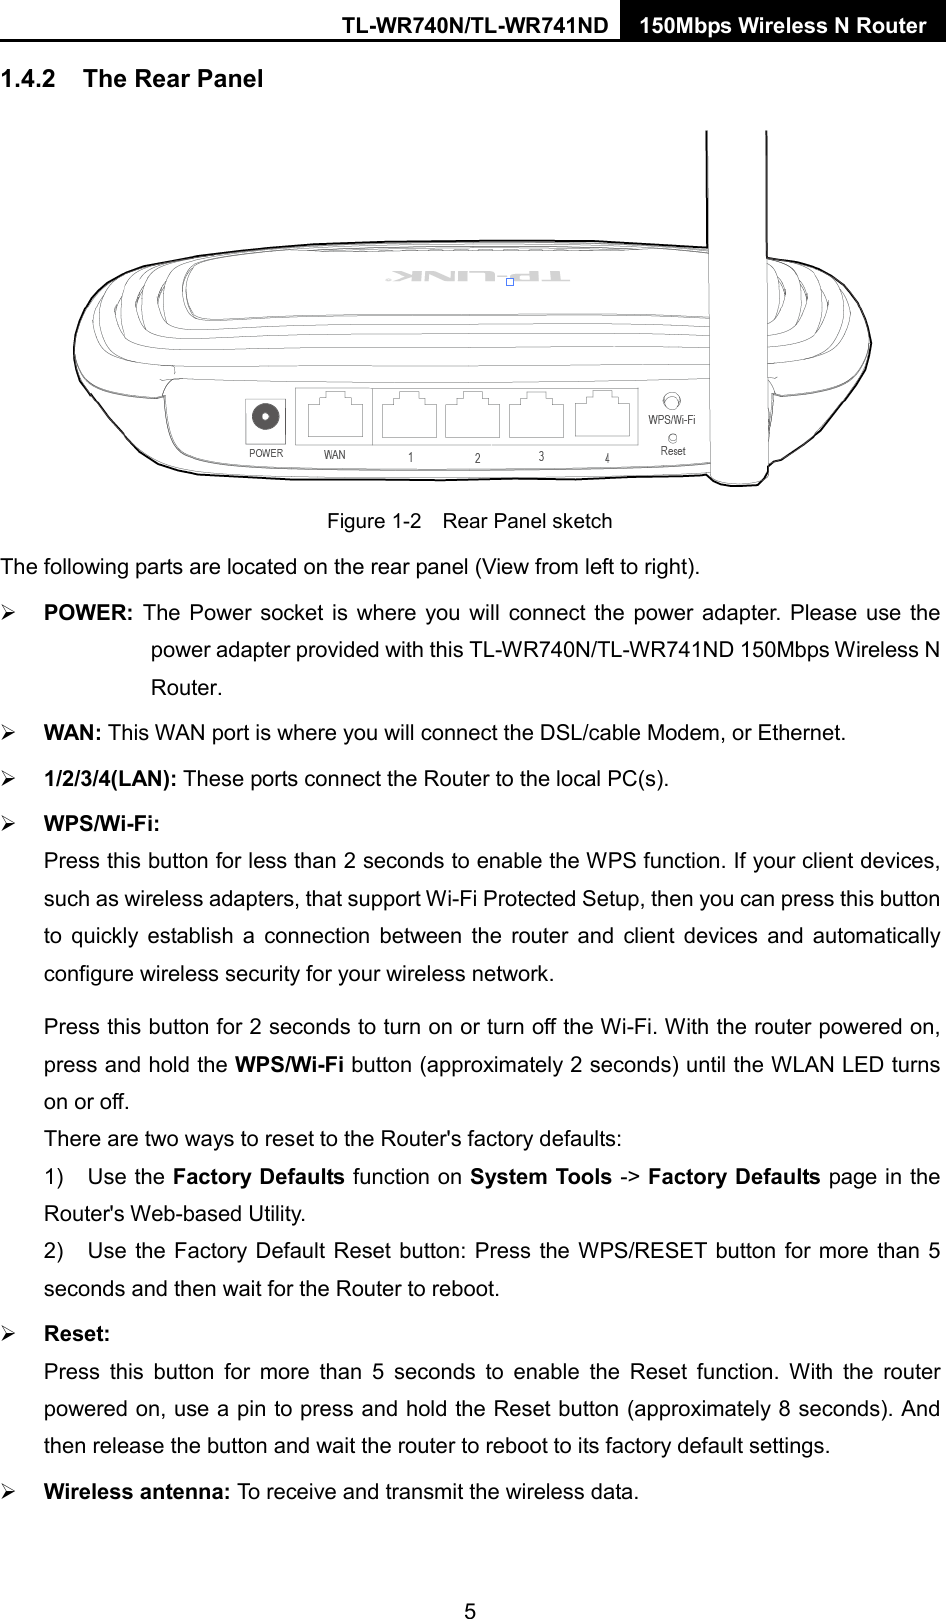 TL-WR740N/TL-WR741ND 150Mbps Wireless N Router  1.4.2 The Rear Panel  Figure 1-2    Rear Panel sketch The following parts are located on the rear panel (View from left to right).  POWER:  The Power socket is where you will connect the power adapter. Please use the power adapter provided with this TL-WR740N/TL-WR741ND 150Mbps Wireless N Router.    WAN: This WAN port is where you will connect the DSL/cable Modem, or Ethernet.  1/2/3/4(LAN): These ports connect the Router to the local PC(s).  WPS/Wi-Fi: Press this button for less than 2 seconds to enable the WPS function. If your client devices, such as wireless adapters, that support Wi-Fi Protected Setup, then you can press this button to quickly establish a connection between the router and client devices and automatically configure wireless security for your wireless network.   Press this button for 2 seconds to turn on or turn off the Wi-Fi. With the router powered on, press and hold the WPS/Wi-Fi button (approximately 2 seconds) until the WLAN LED turns on or off.   There are two ways to reset to the Router&apos;s factory defaults: 1) Use the Factory Defaults function on System Tools -&gt; Factory Defaults page in the Router&apos;s Web-based Utility. 2) Use the Factory Default Reset button: Press the WPS/RESET button for more than 5 seconds and then wait for the Router to reboot.  Reset: Press this button for more than 5 seconds to enable the Reset function. With the router powered on, use a pin to press and hold the Reset button (approximately 8 seconds). And then release the button and wait the router to reboot to its factory default settings.  Wireless antenna: To receive and transmit the wireless data. 5 